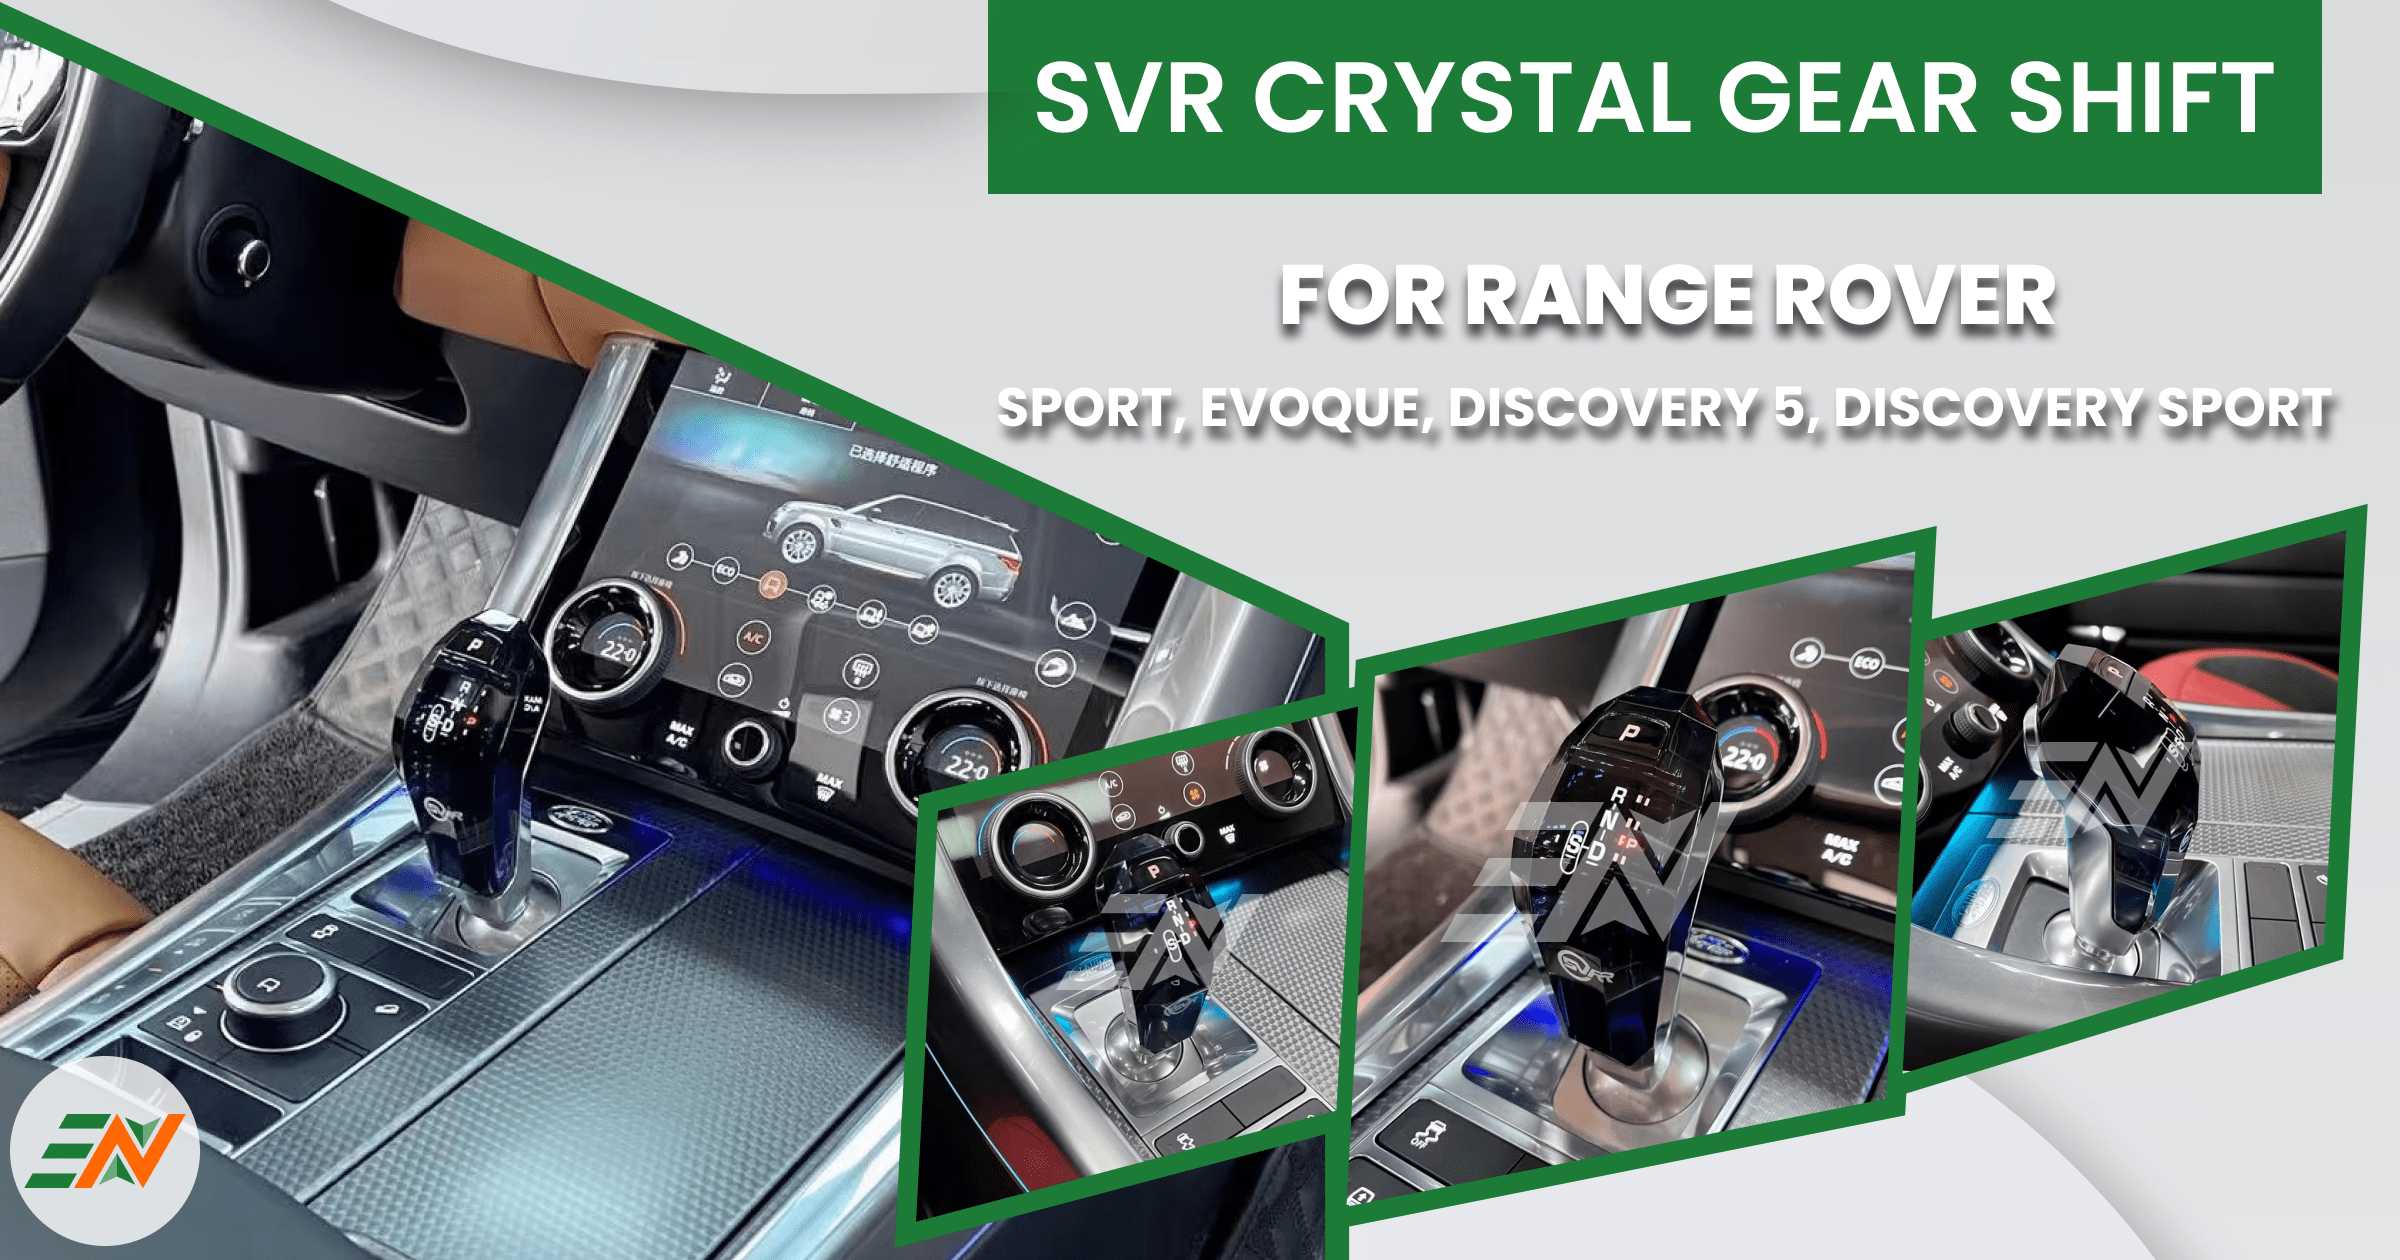 With our SVR Crystal Gear Shift, You Can Upgrade Your Driving Experience  Even Further.